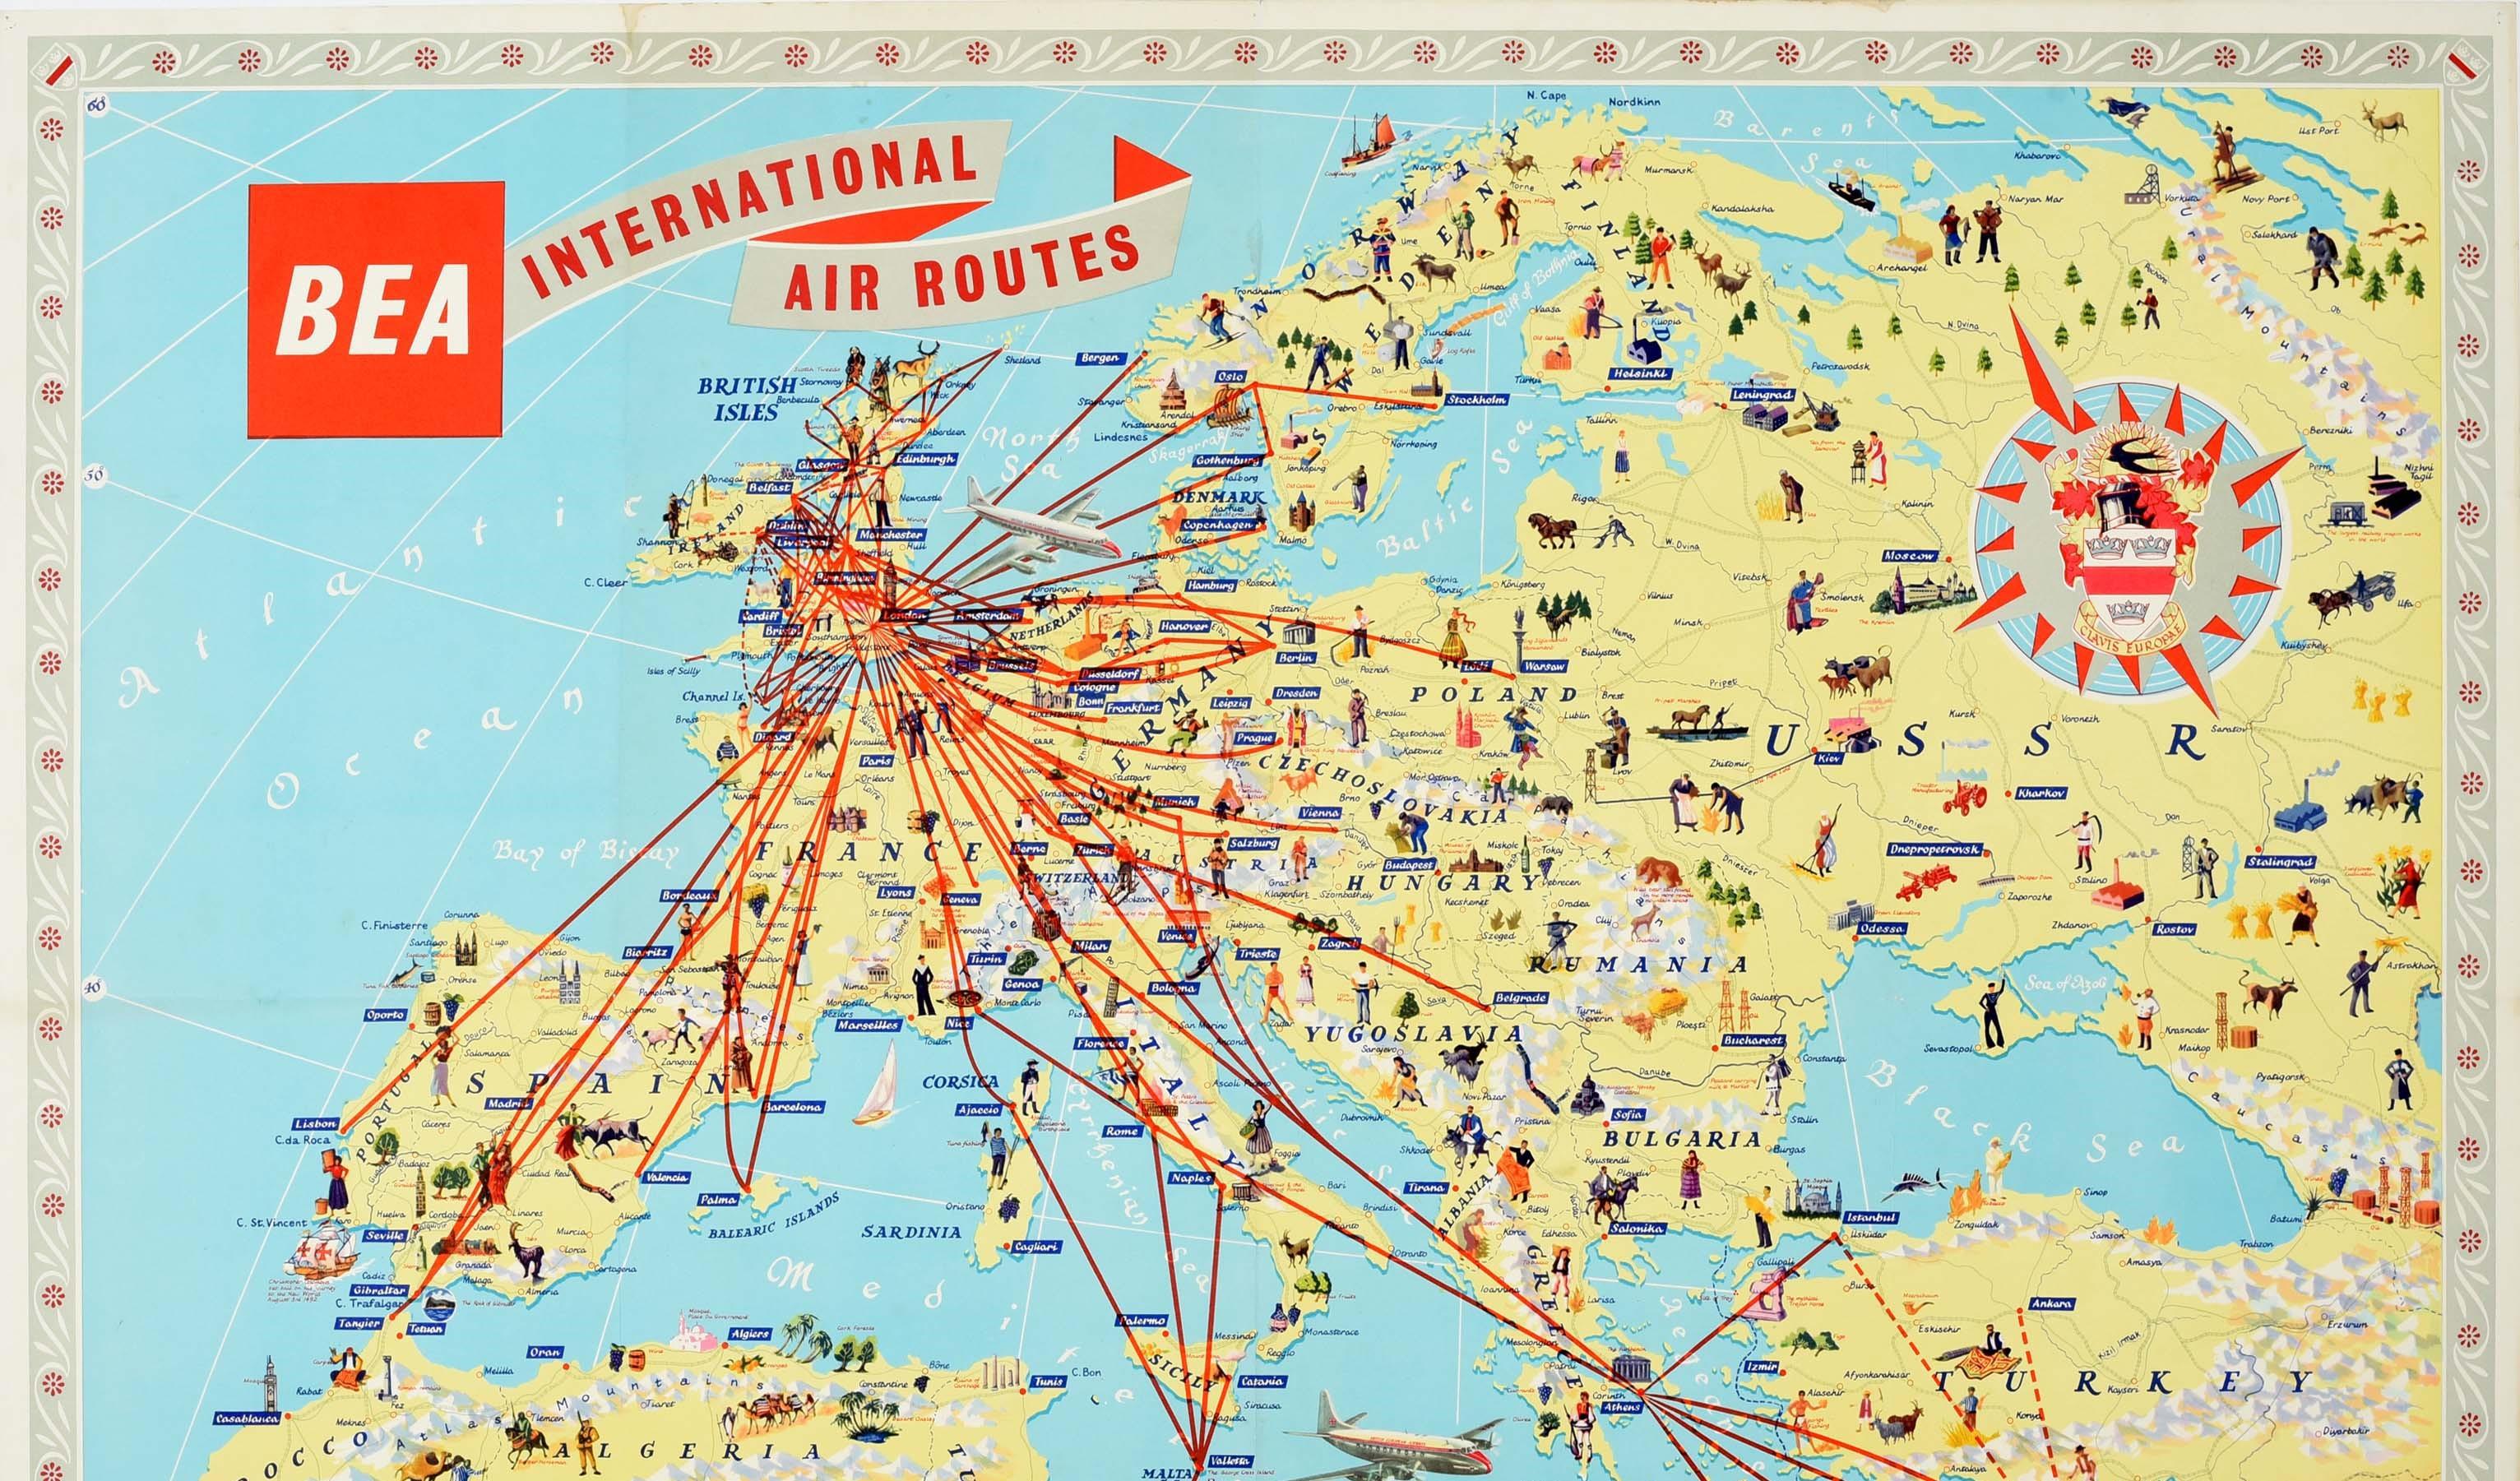 aer lingus route map